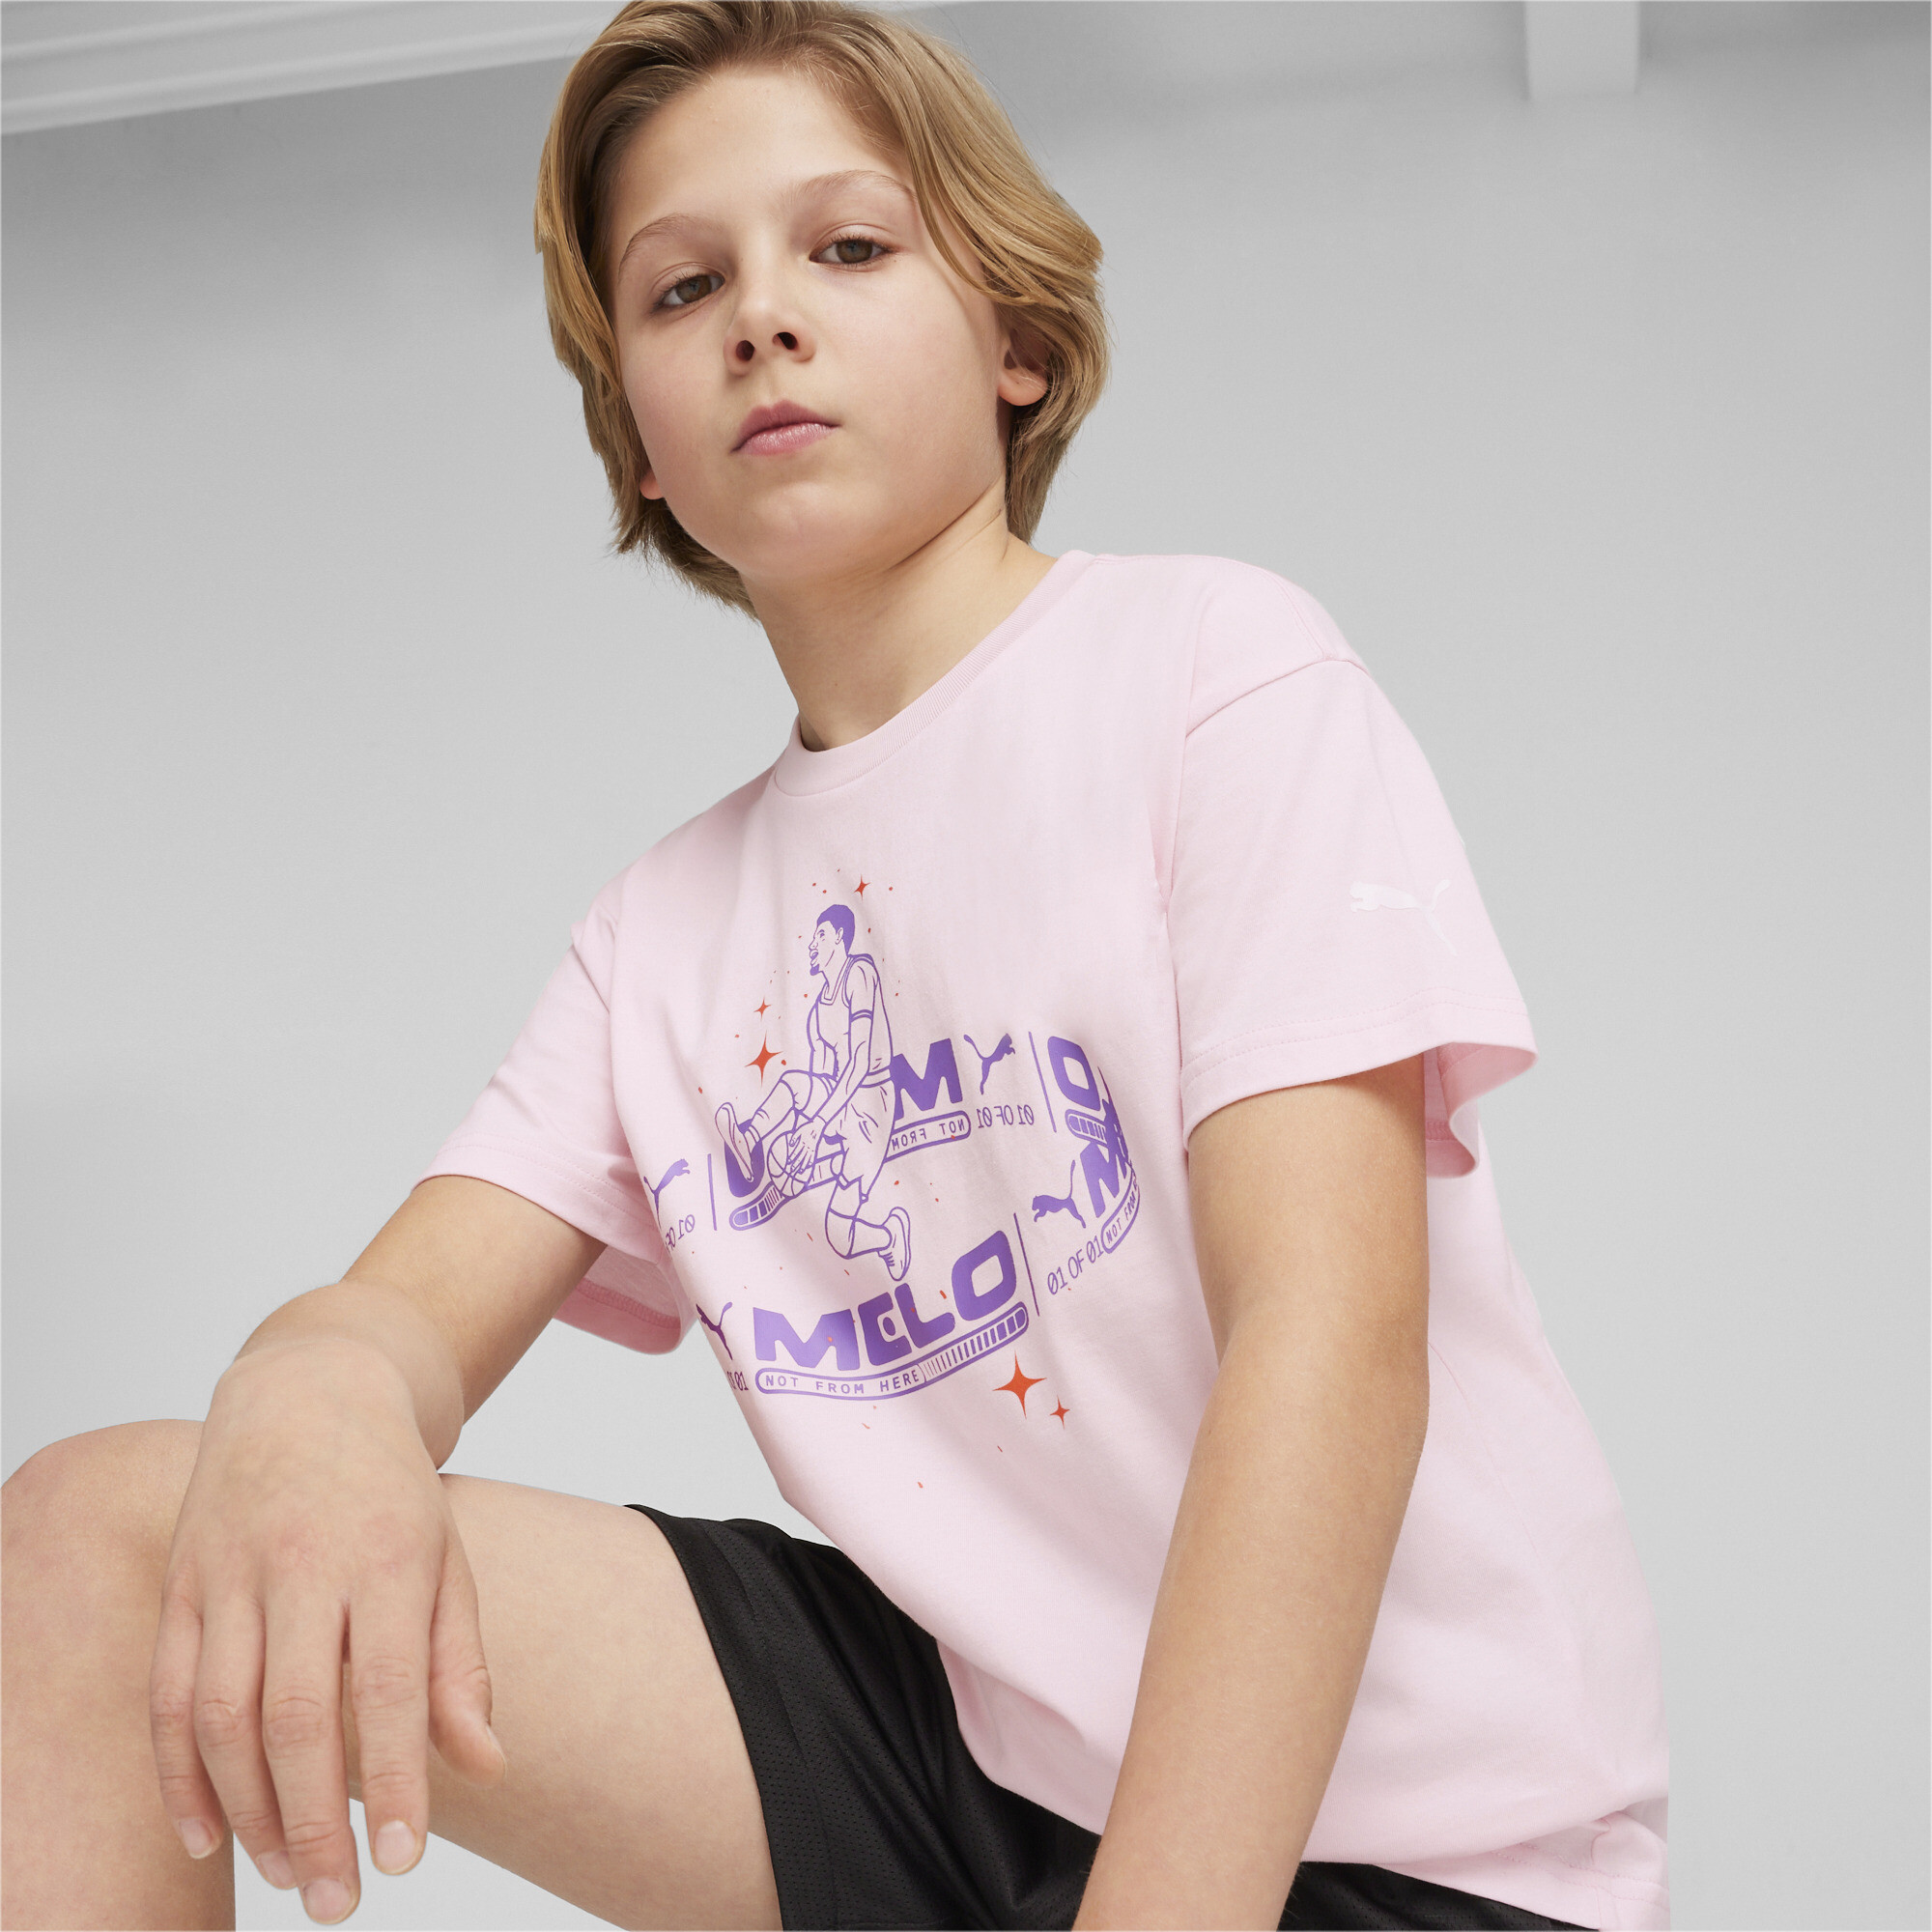 Puma MELO IRIDESCENT Boys' T-Shirt, Pink, Size 15-16Y, Age